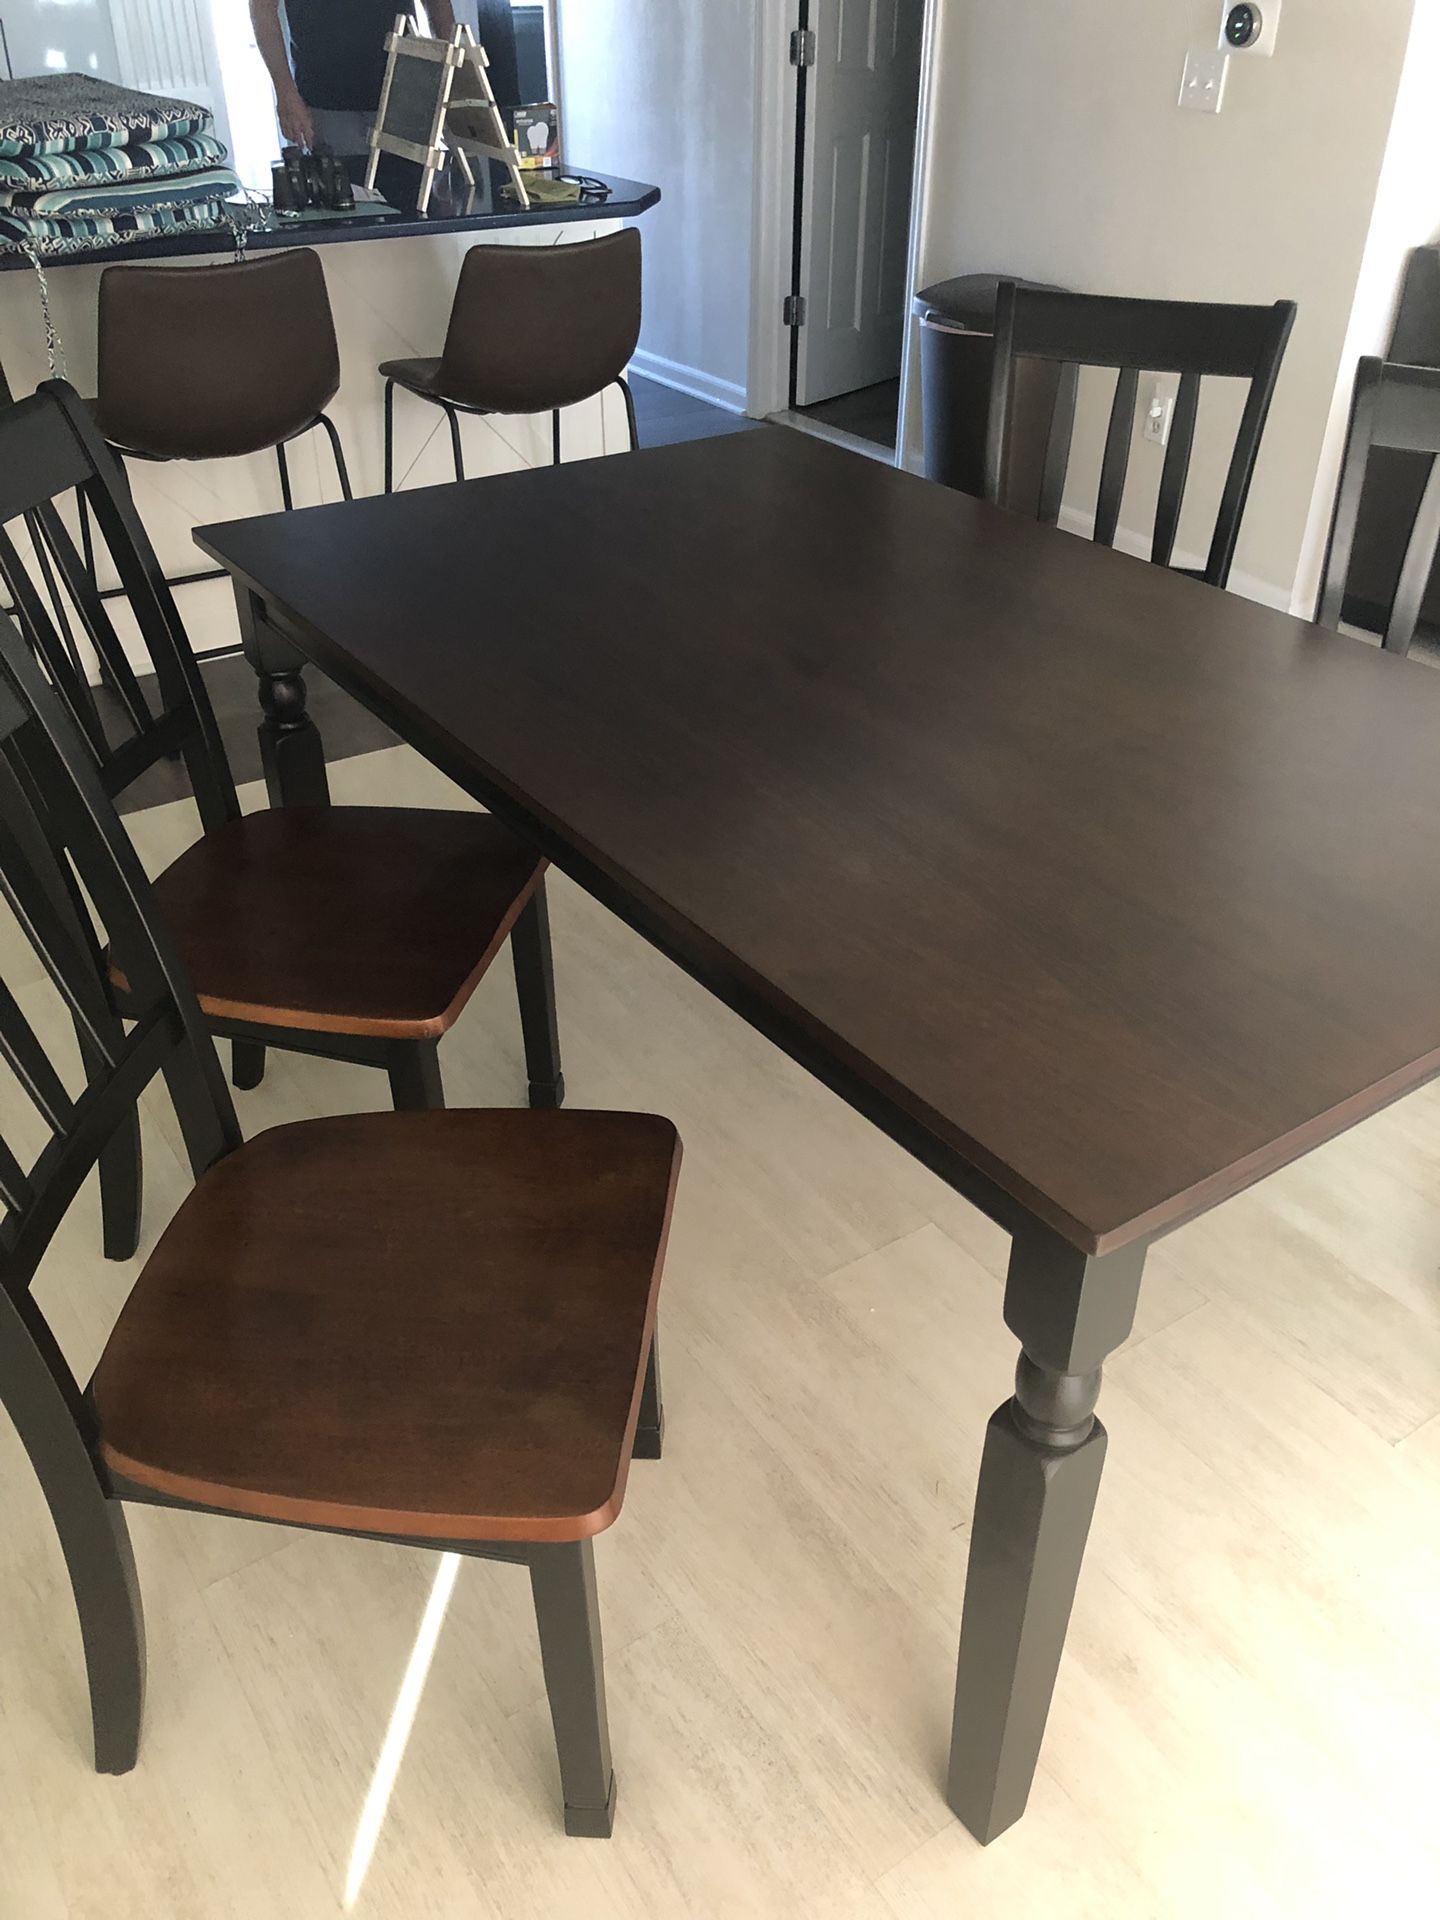 Kitchen Table 4 chairs